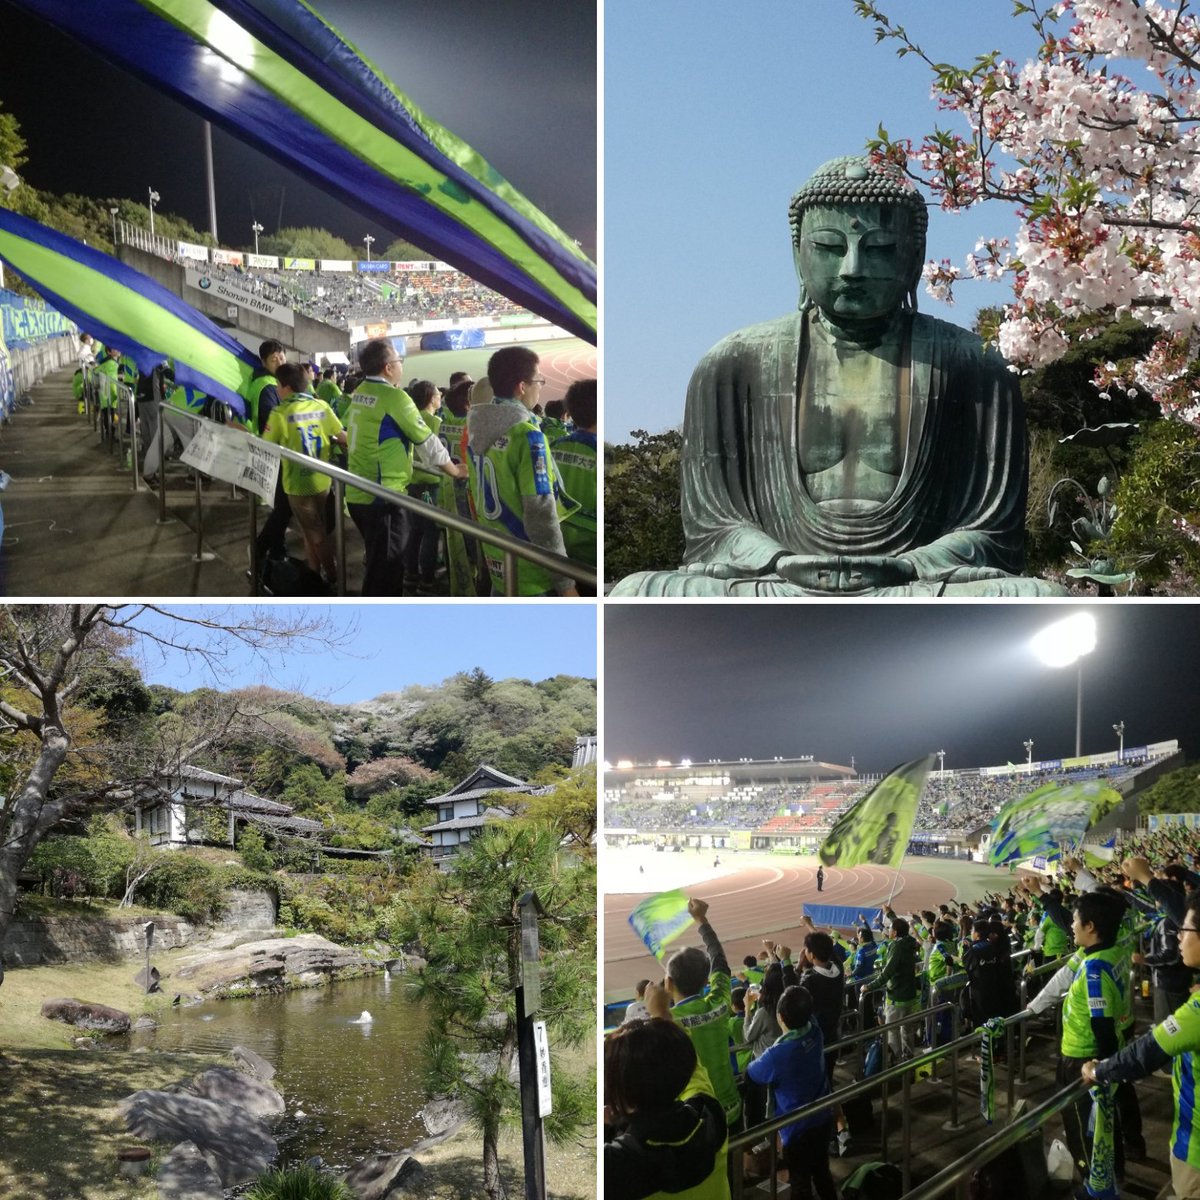 Two years ago today I went to watch Shonan Bellmare for the first time. So here's a short thread of all things Shonan Bellmare. I always love the passion of the fans at Shonan BMW Stadium. And I really enjoy combining a match with a trip to nearby Kamakura  